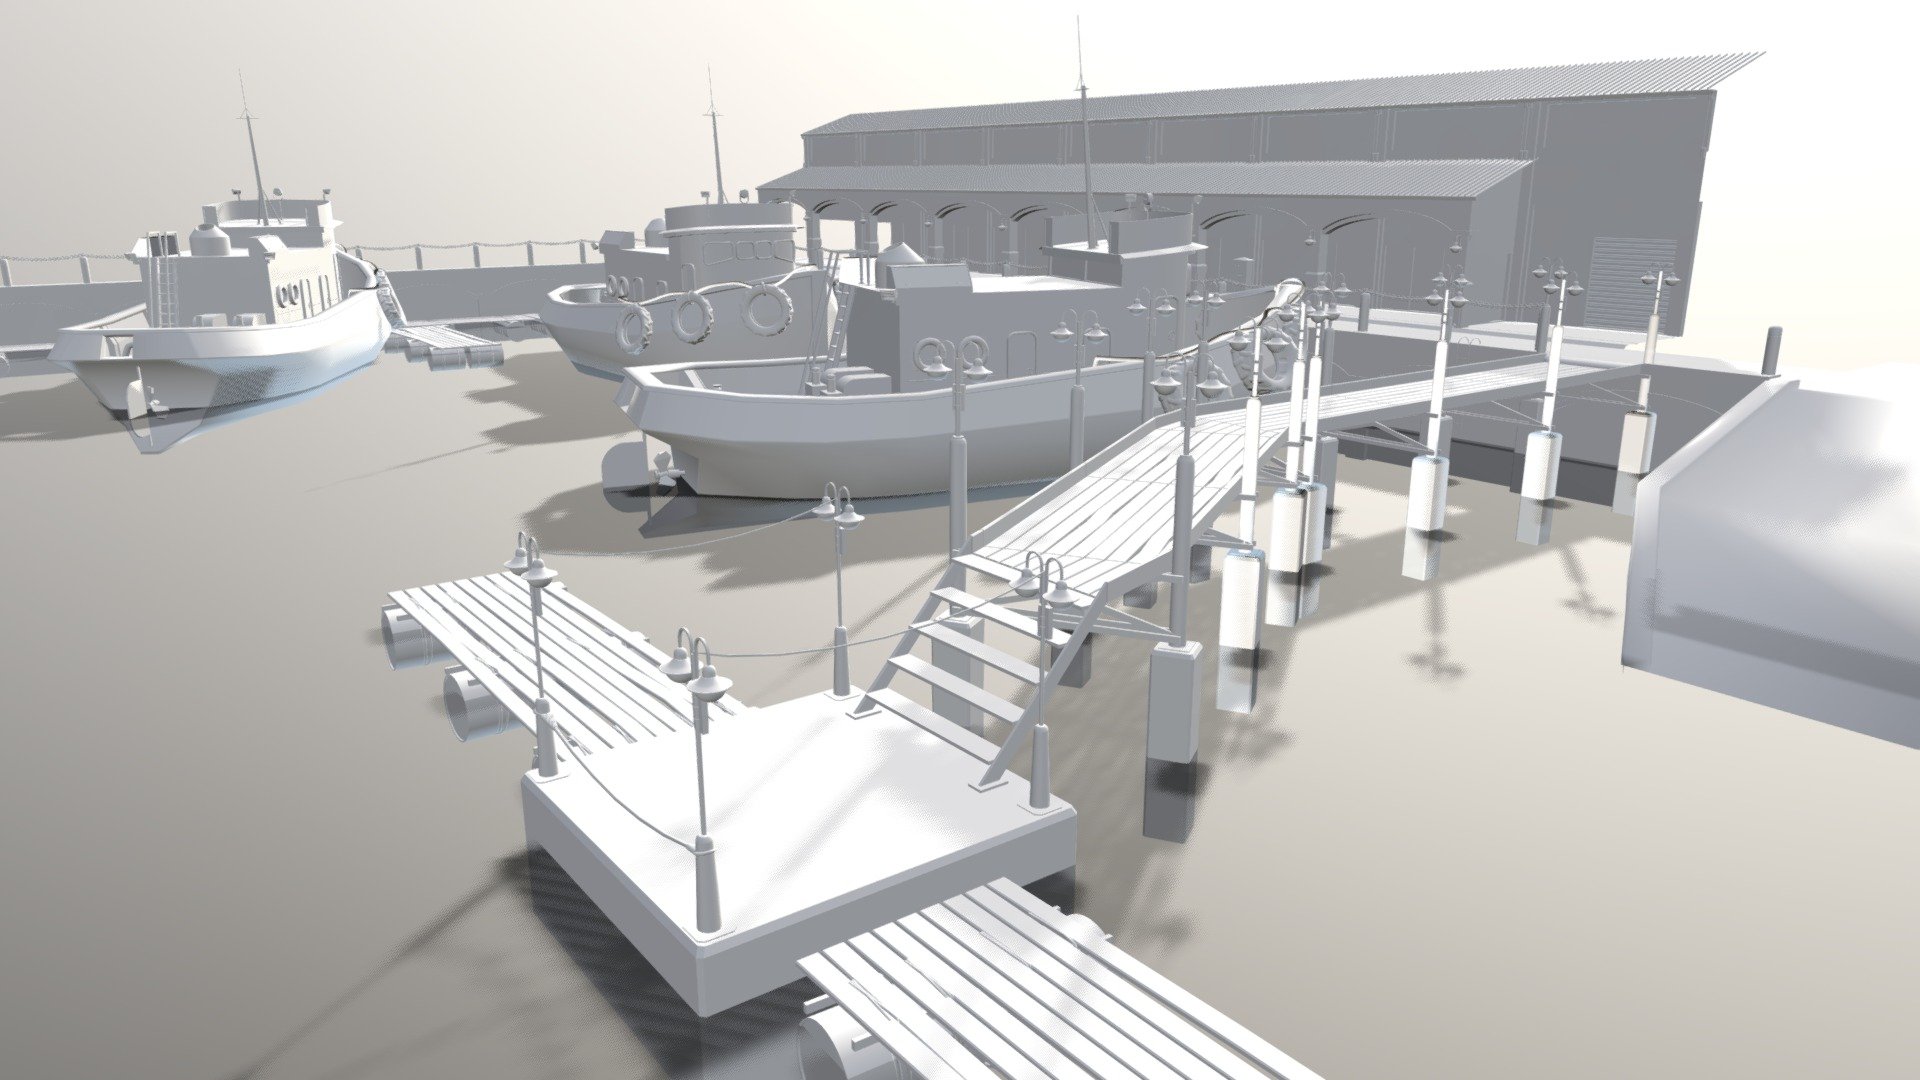 The scene is built around modular content showing a 3D Harbor Pier or dock and bay area, with a number of small trawler type boats in the area. Also, a floating dock with a jetty or boardwalk.

what you get: 1 x blender scene with full harbor Blender 2.79
1 x Max 2015 / Scanline scene
1 x FBX Export - Harbor Scene With Pier And Boats 2 0 - Buy Royalty Free 3D model by 3D Content Online (@hknoblauch) 3d model